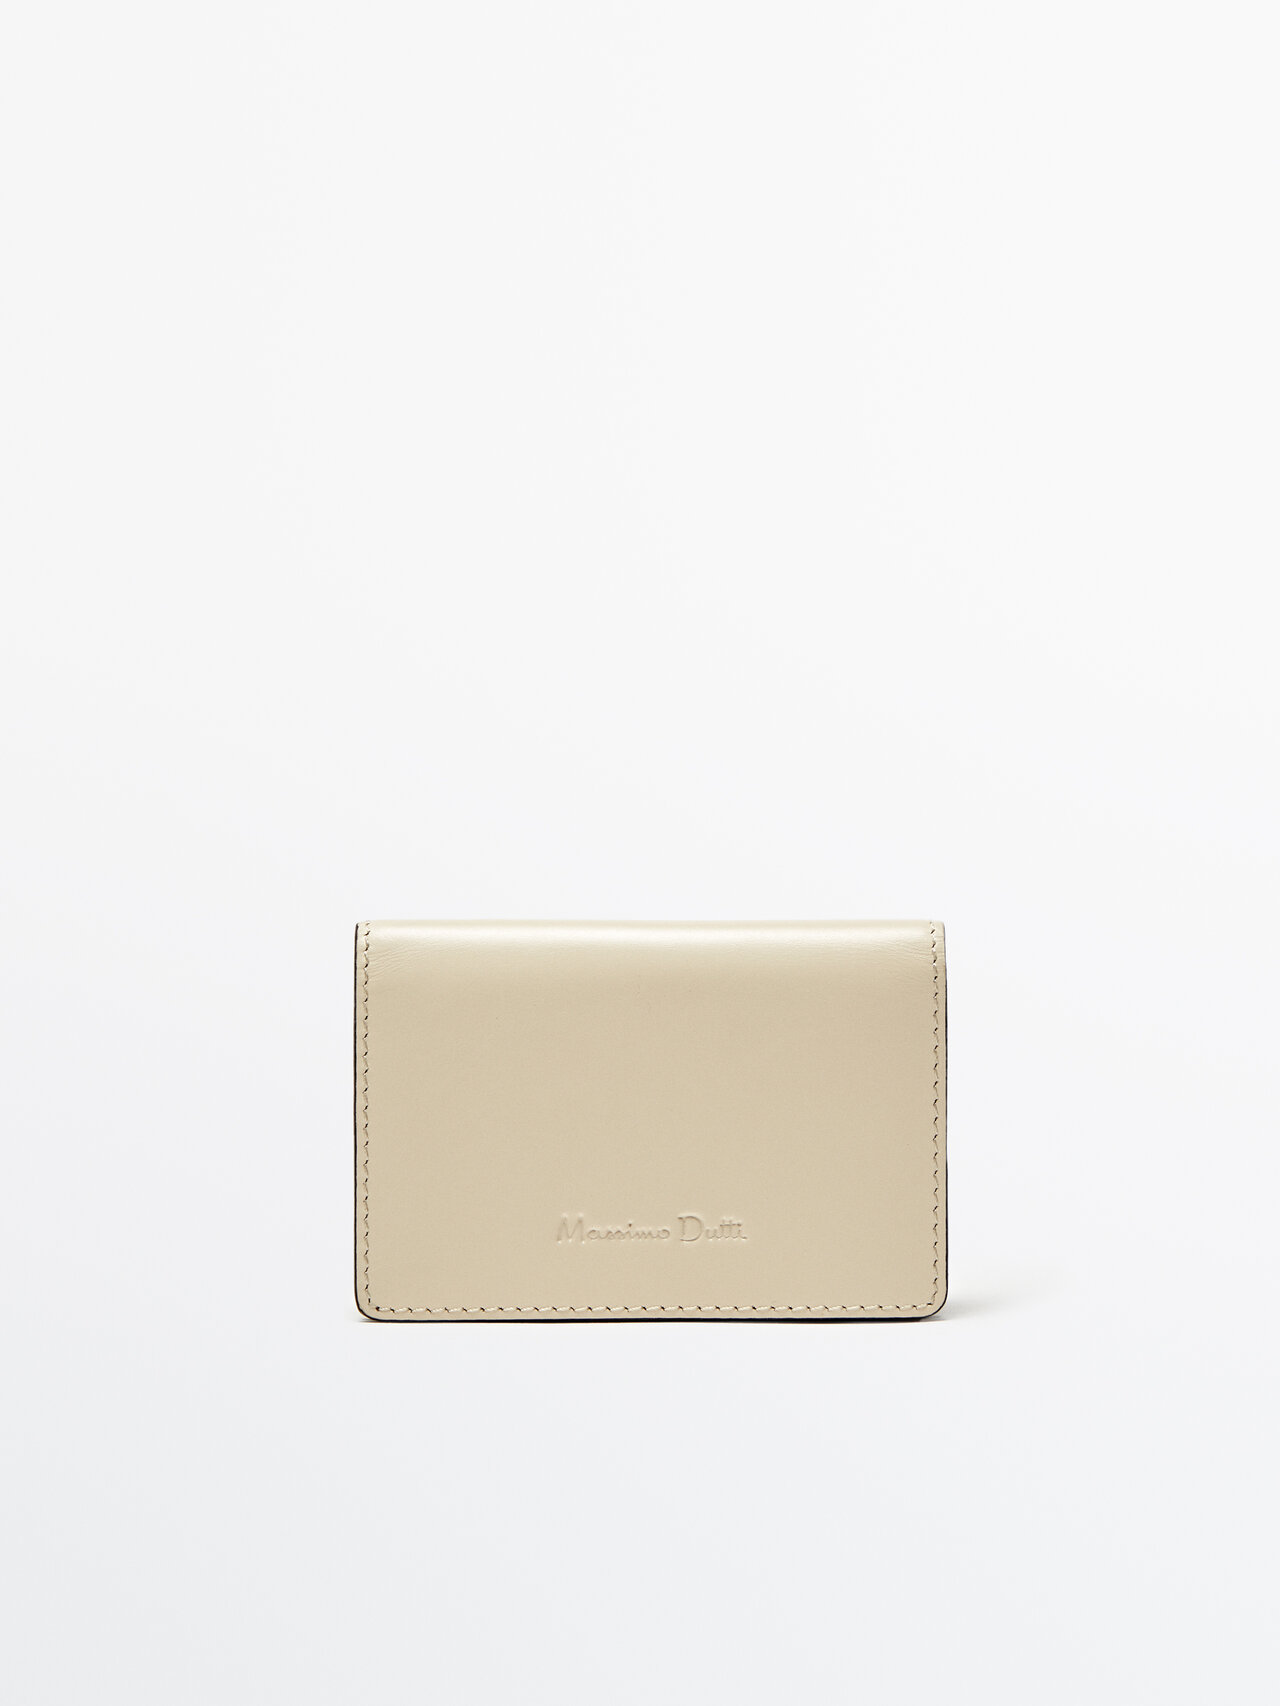 Massimo Dutti Nappa Leather Wallet In Neutrals